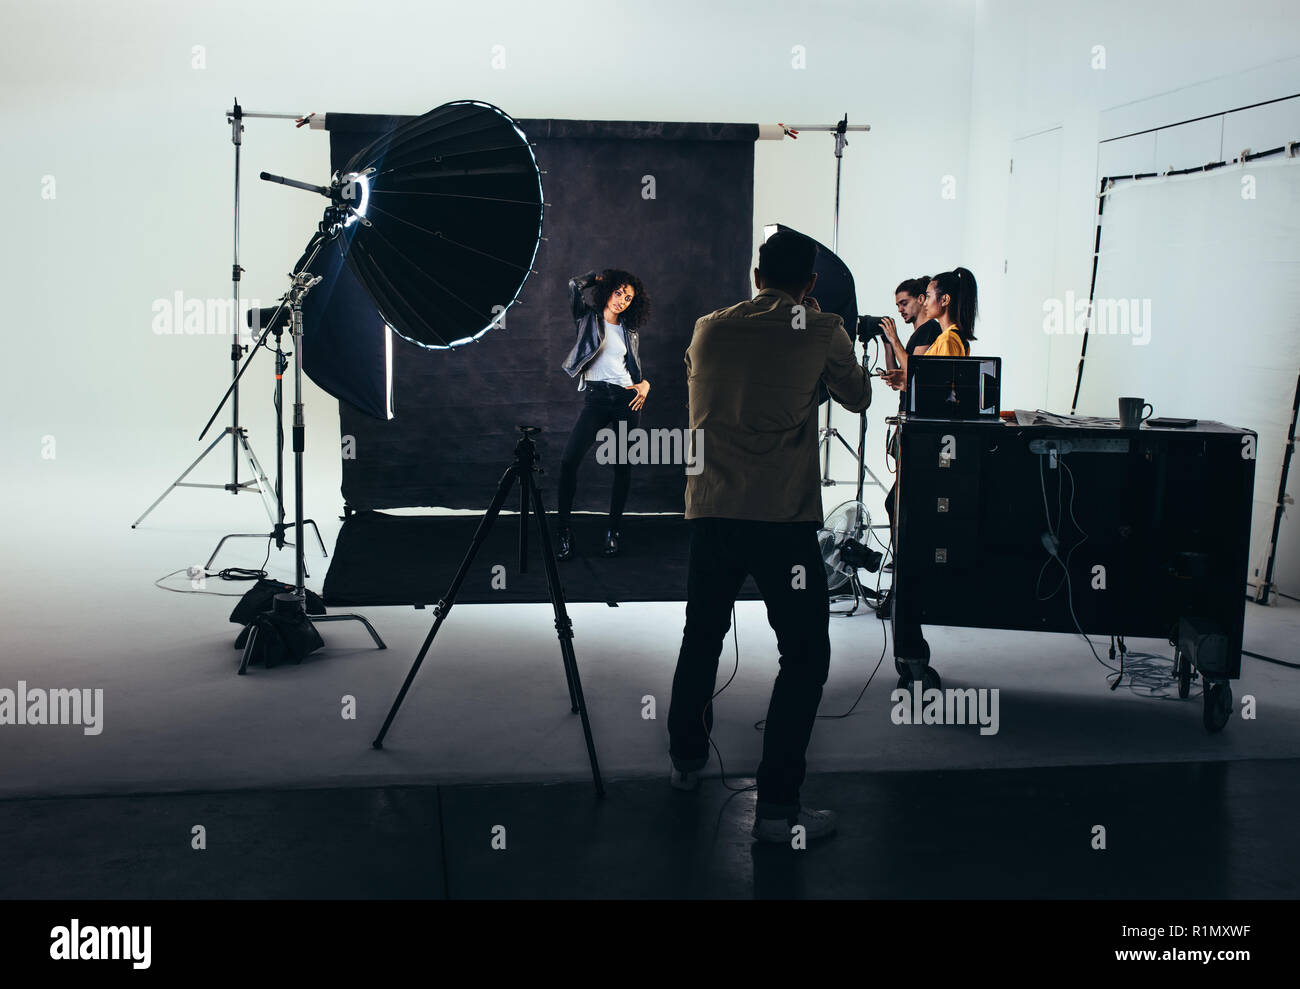 Photographer shooting photos of a female model with studio flash lights on. Photographer with his team during a photo shoot. Stock Photo